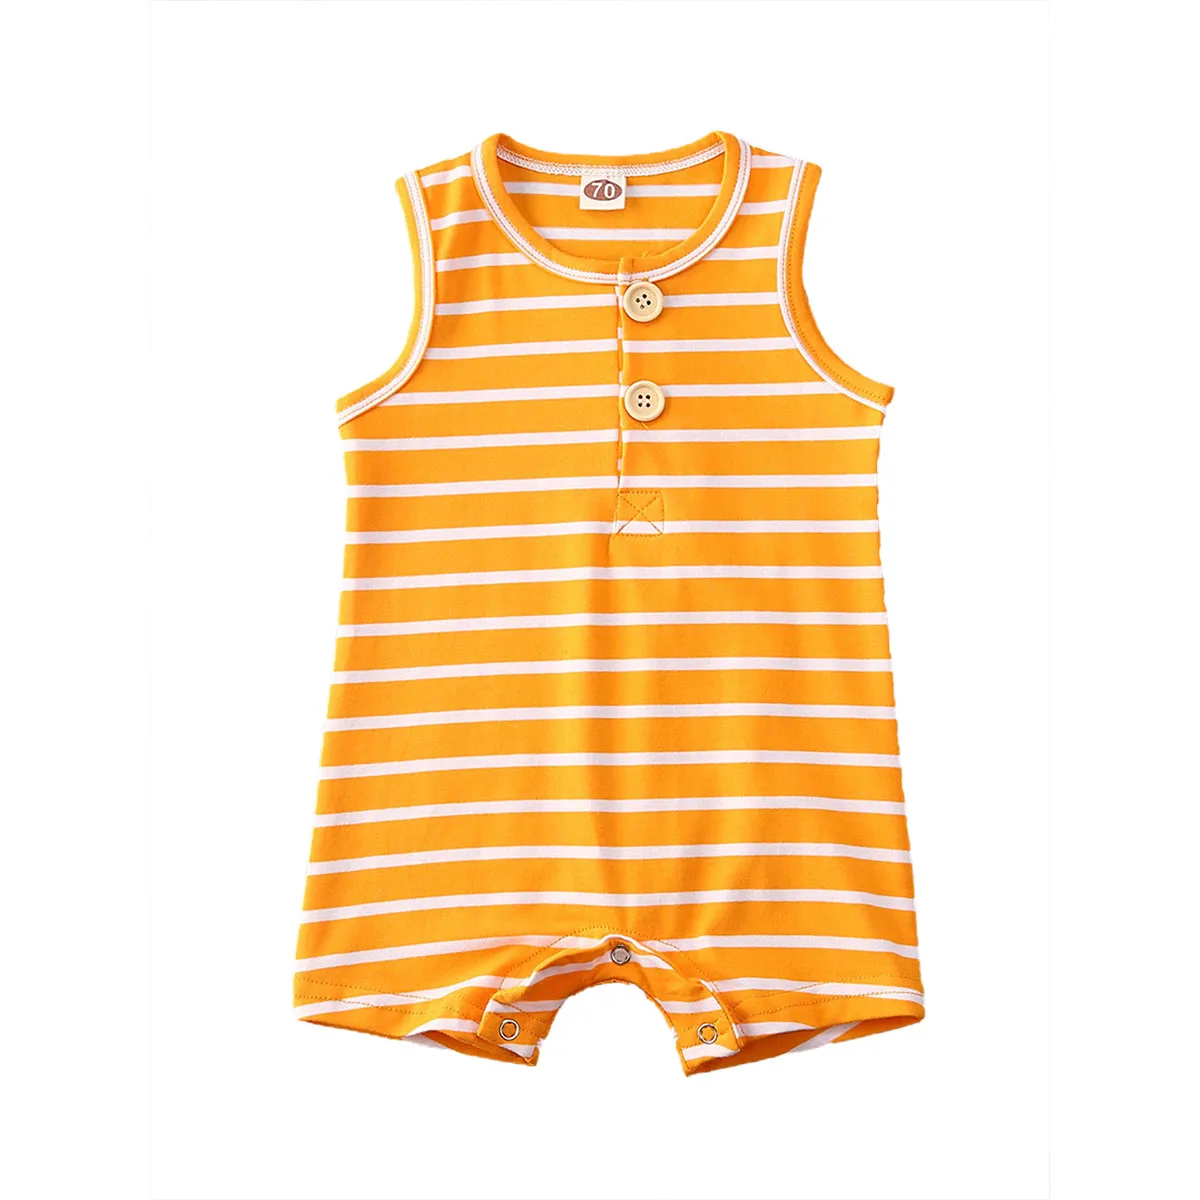 Baby Bodysuits comfotable 2019 Baby Summer Clothing 0-24 Newborn Infant Baby Boy Girl Striped Romper Clothes Sleeveless Striped Summer Outfit Jumpsuit Baby Bodysuits classic Baby Rompers